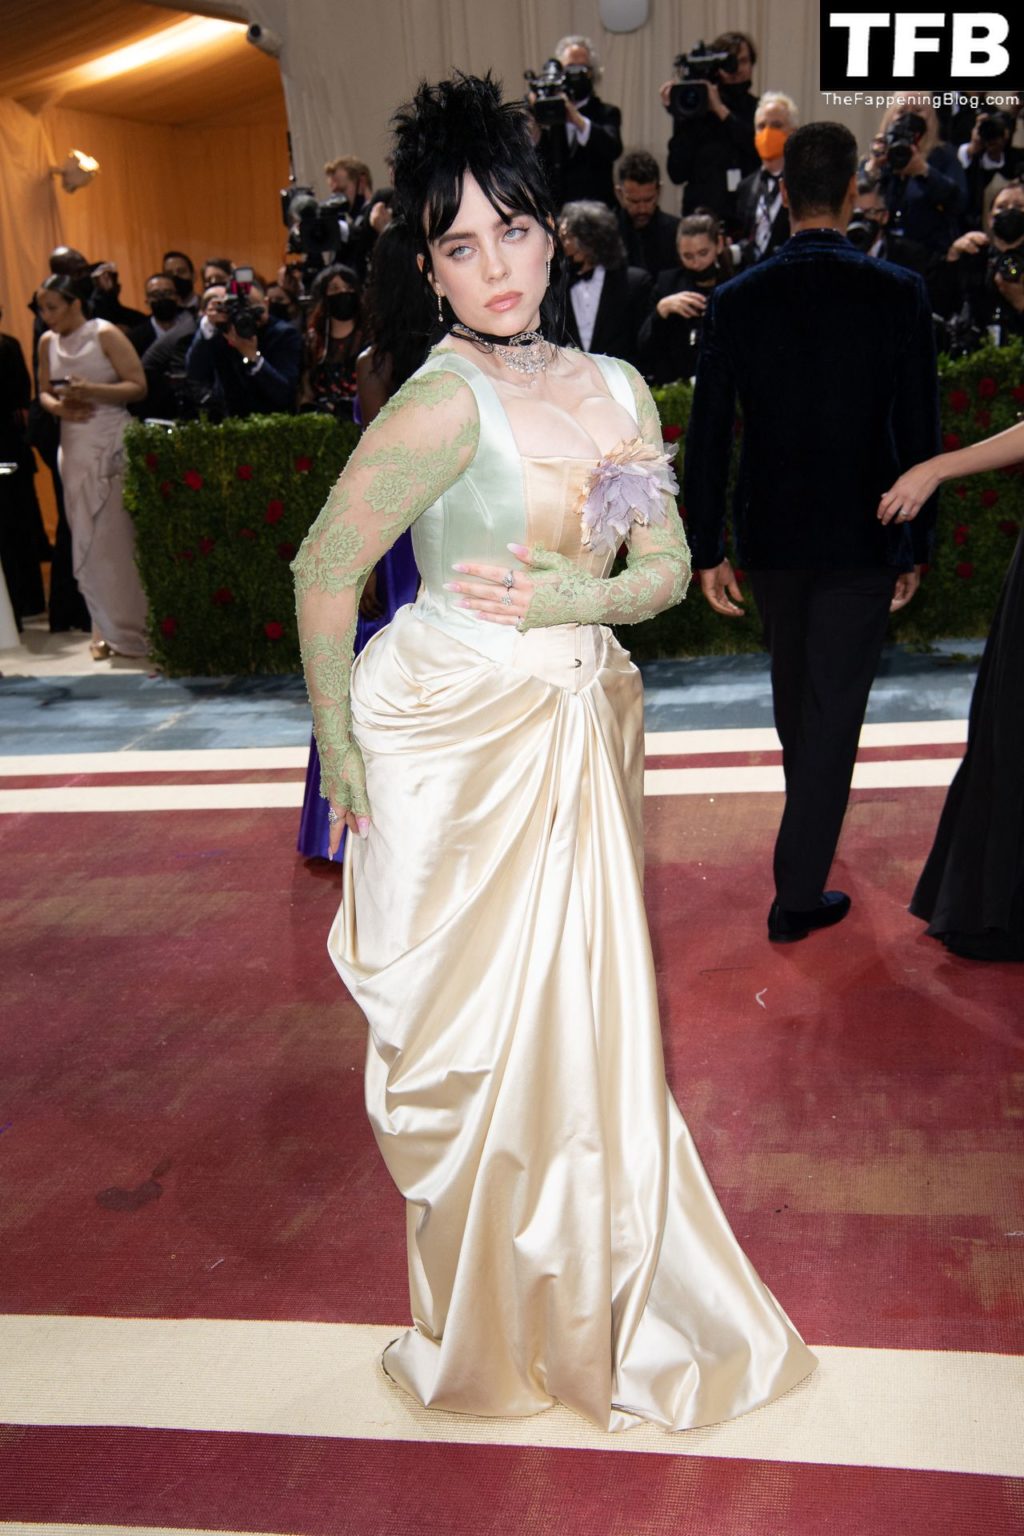 Billie Eilish Sexy The Fappening Blog 23 1024x1536 - Billie Eilish Showcases Nice Cleavage at The 2022 Met Gala in NYC (155 Photos)